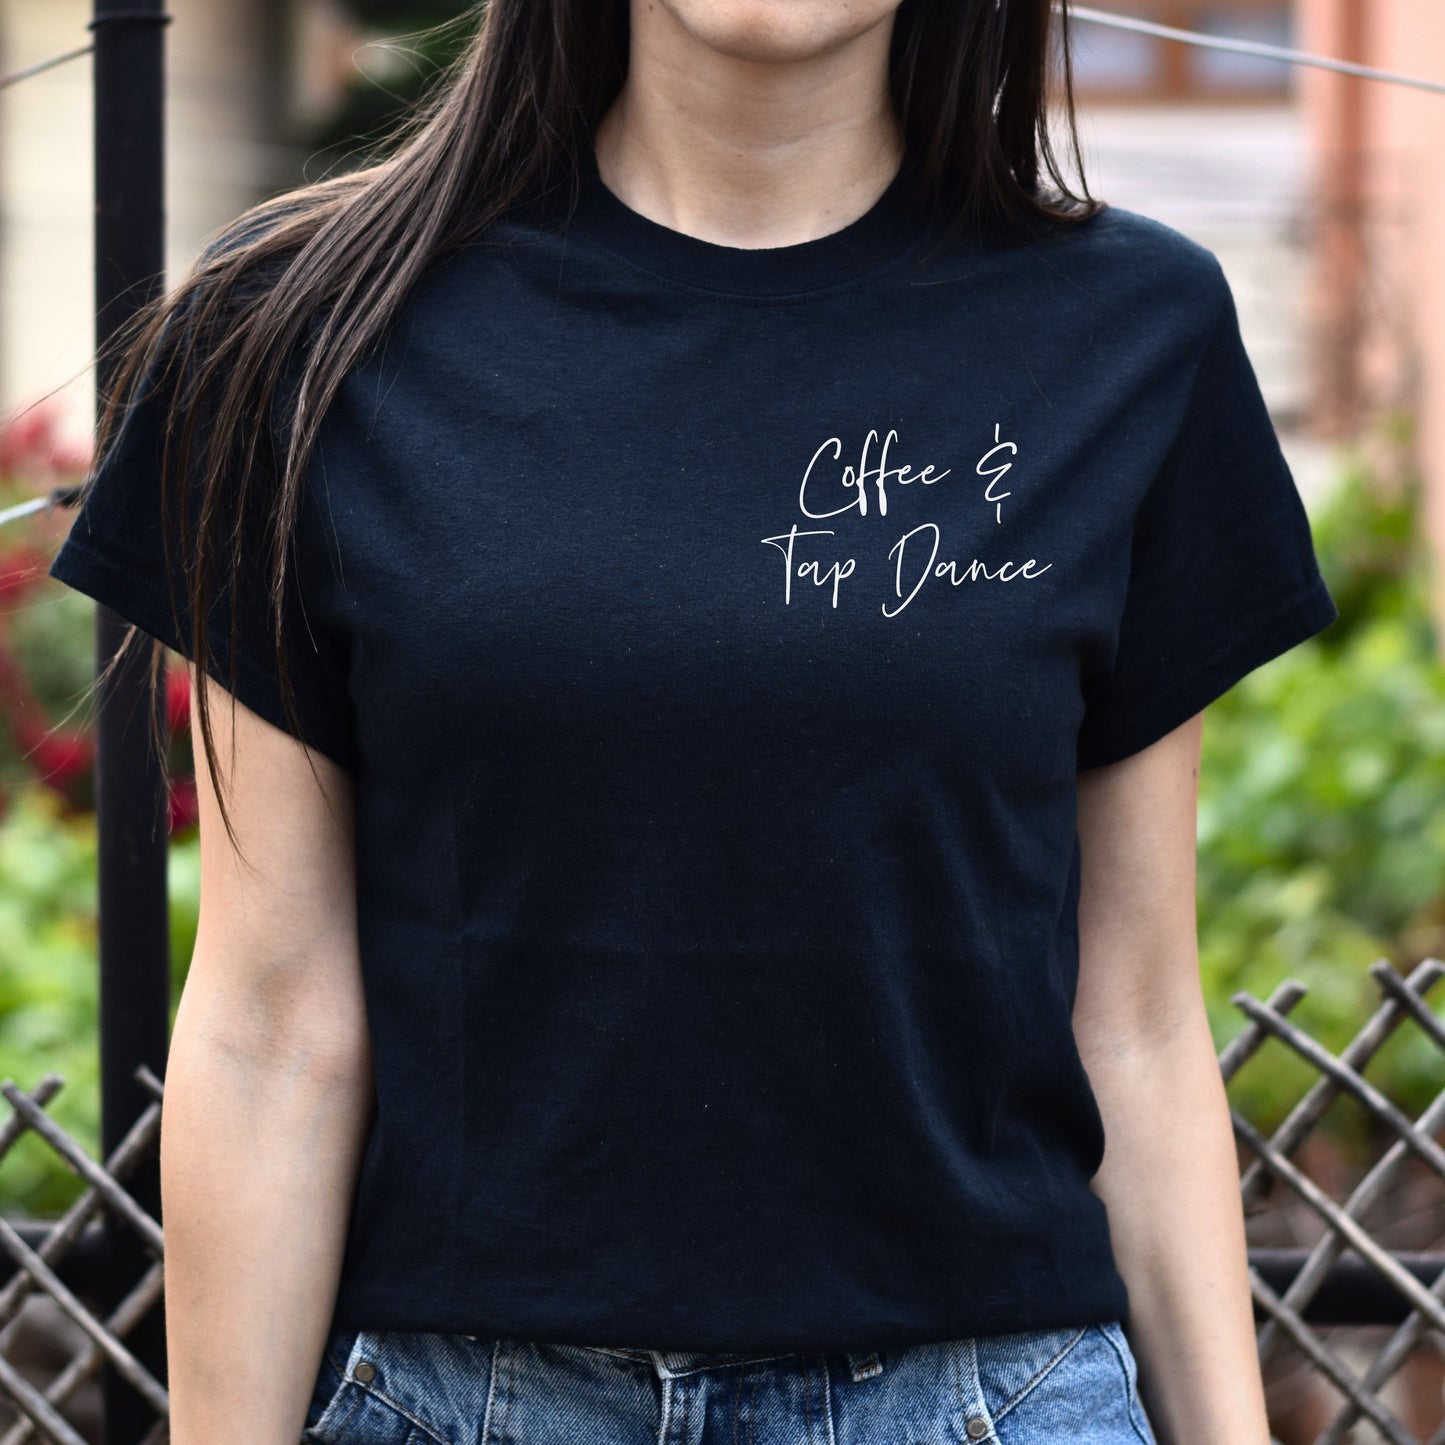 Coffee and Tap dance pocket Unisex T-shirt tap dancer tee Black Navy Dark Heather-Family-Gift-Planet